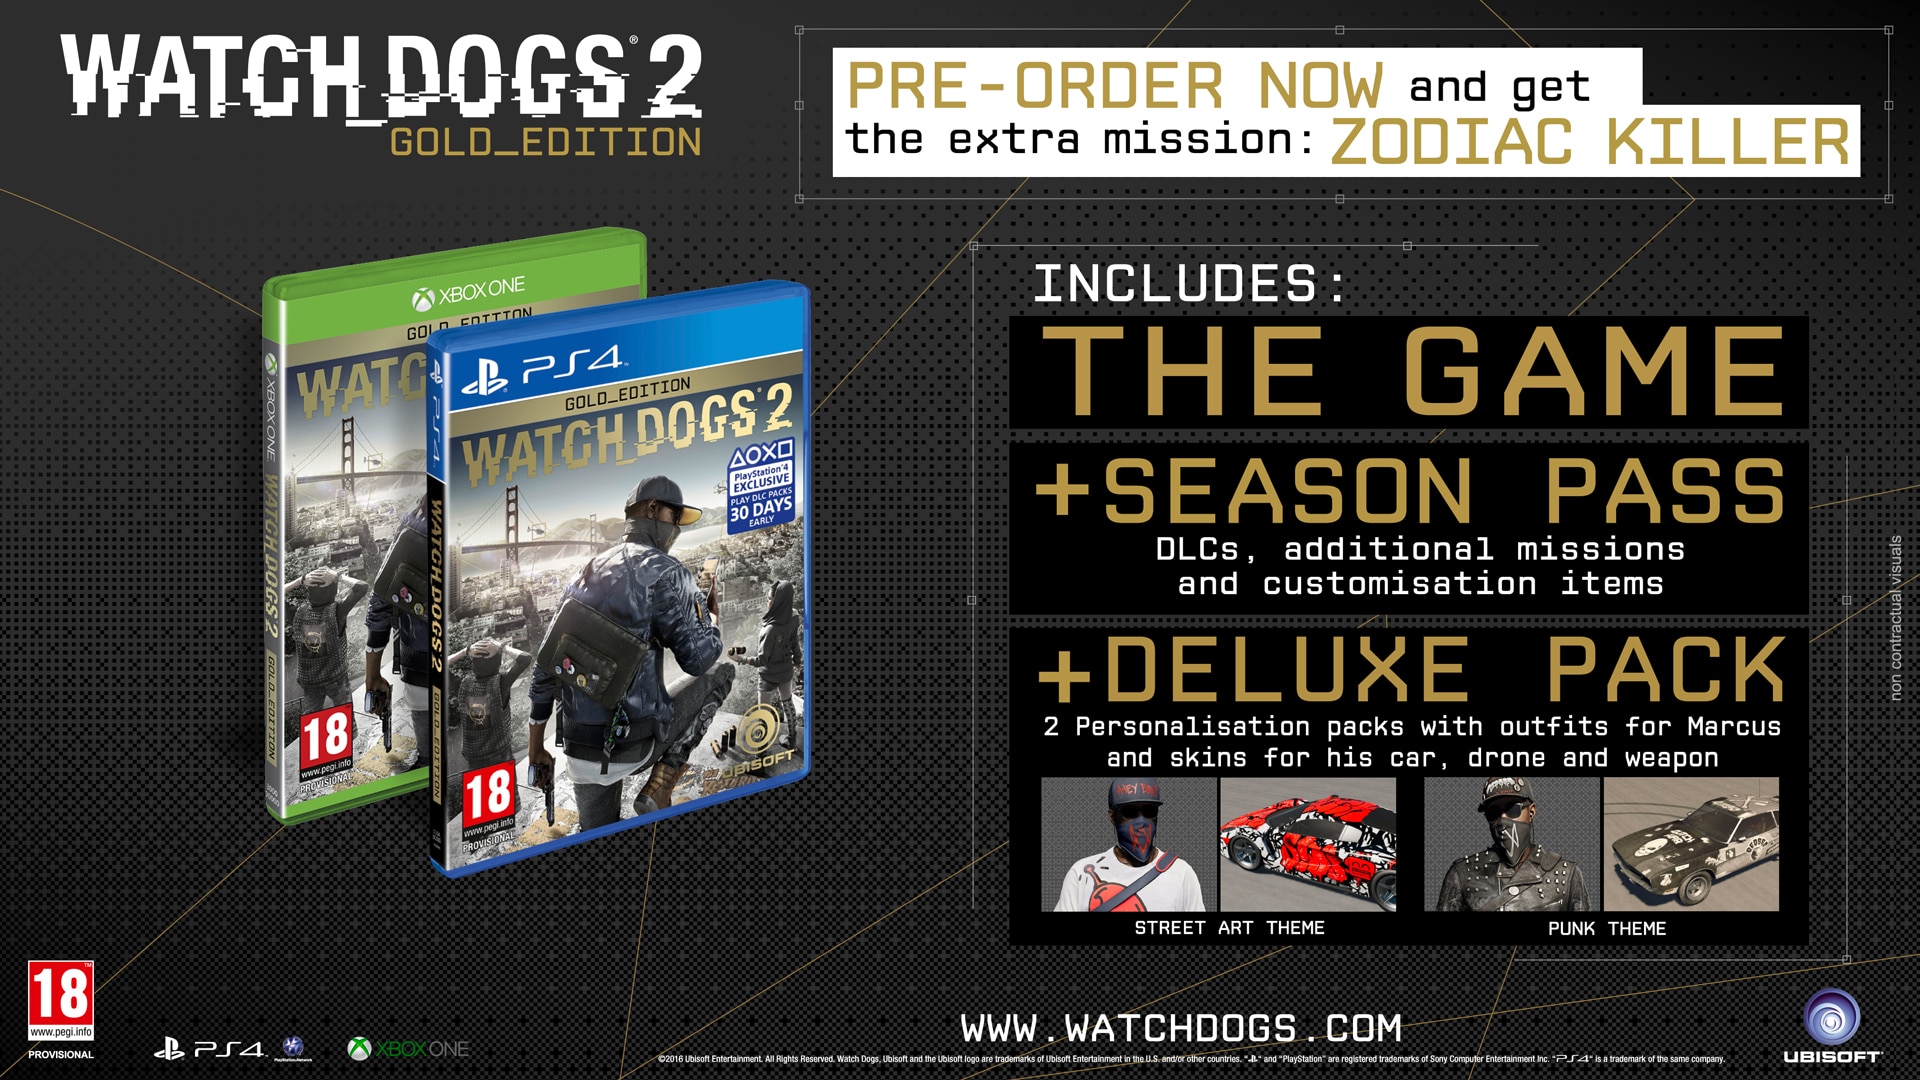 watch dogs 2 gold edition